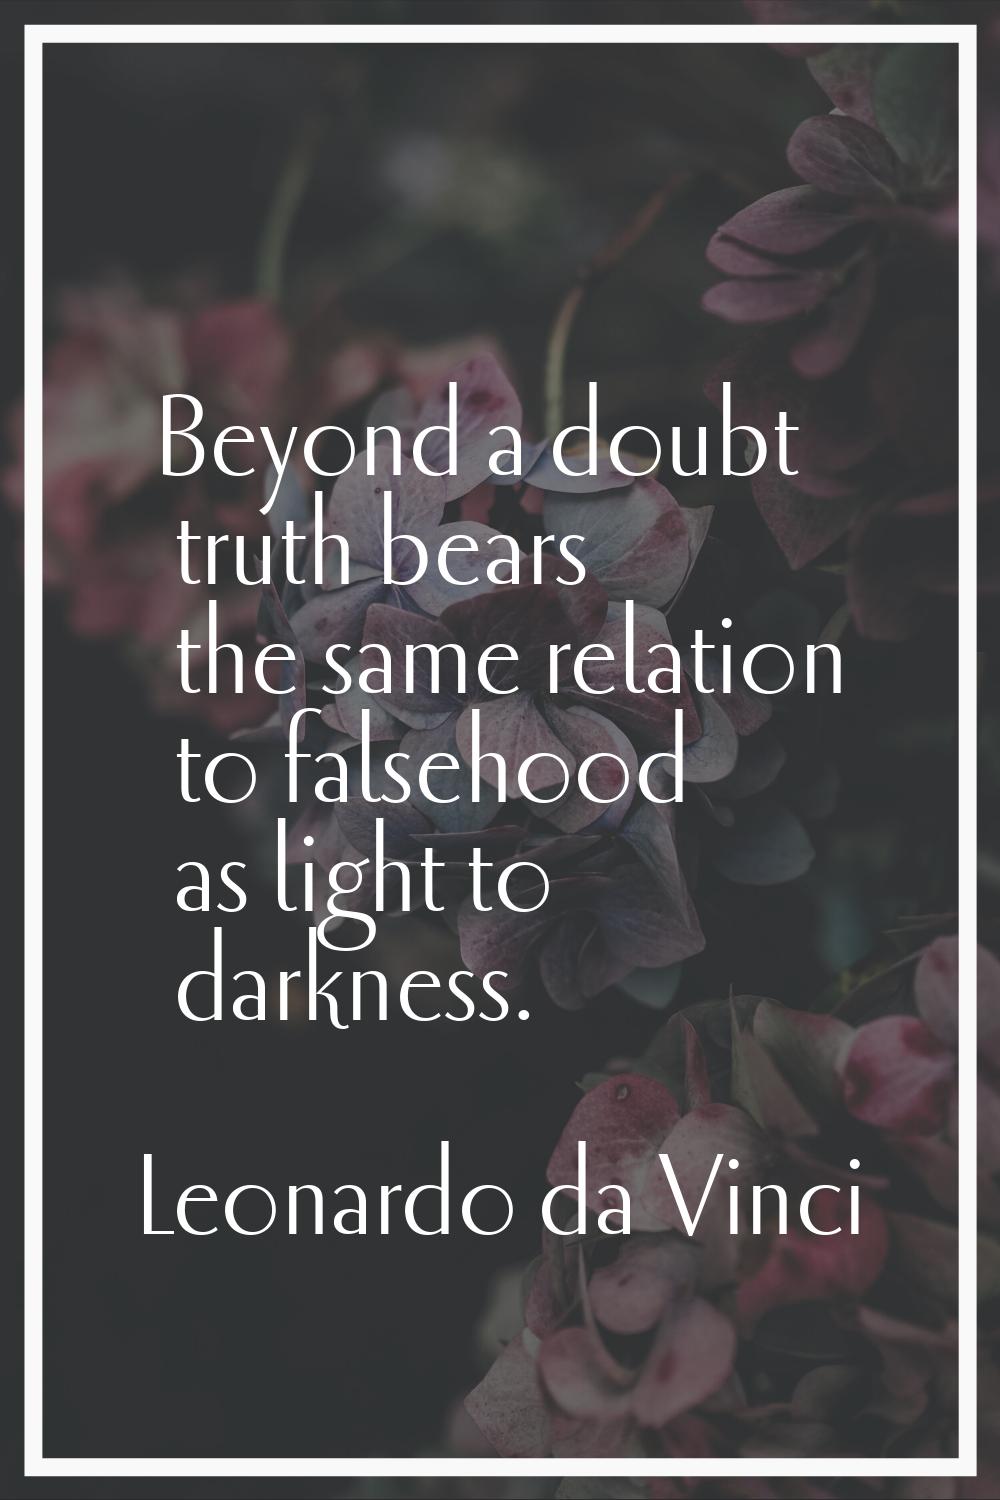 Beyond a doubt truth bears the same relation to falsehood as light to darkness.